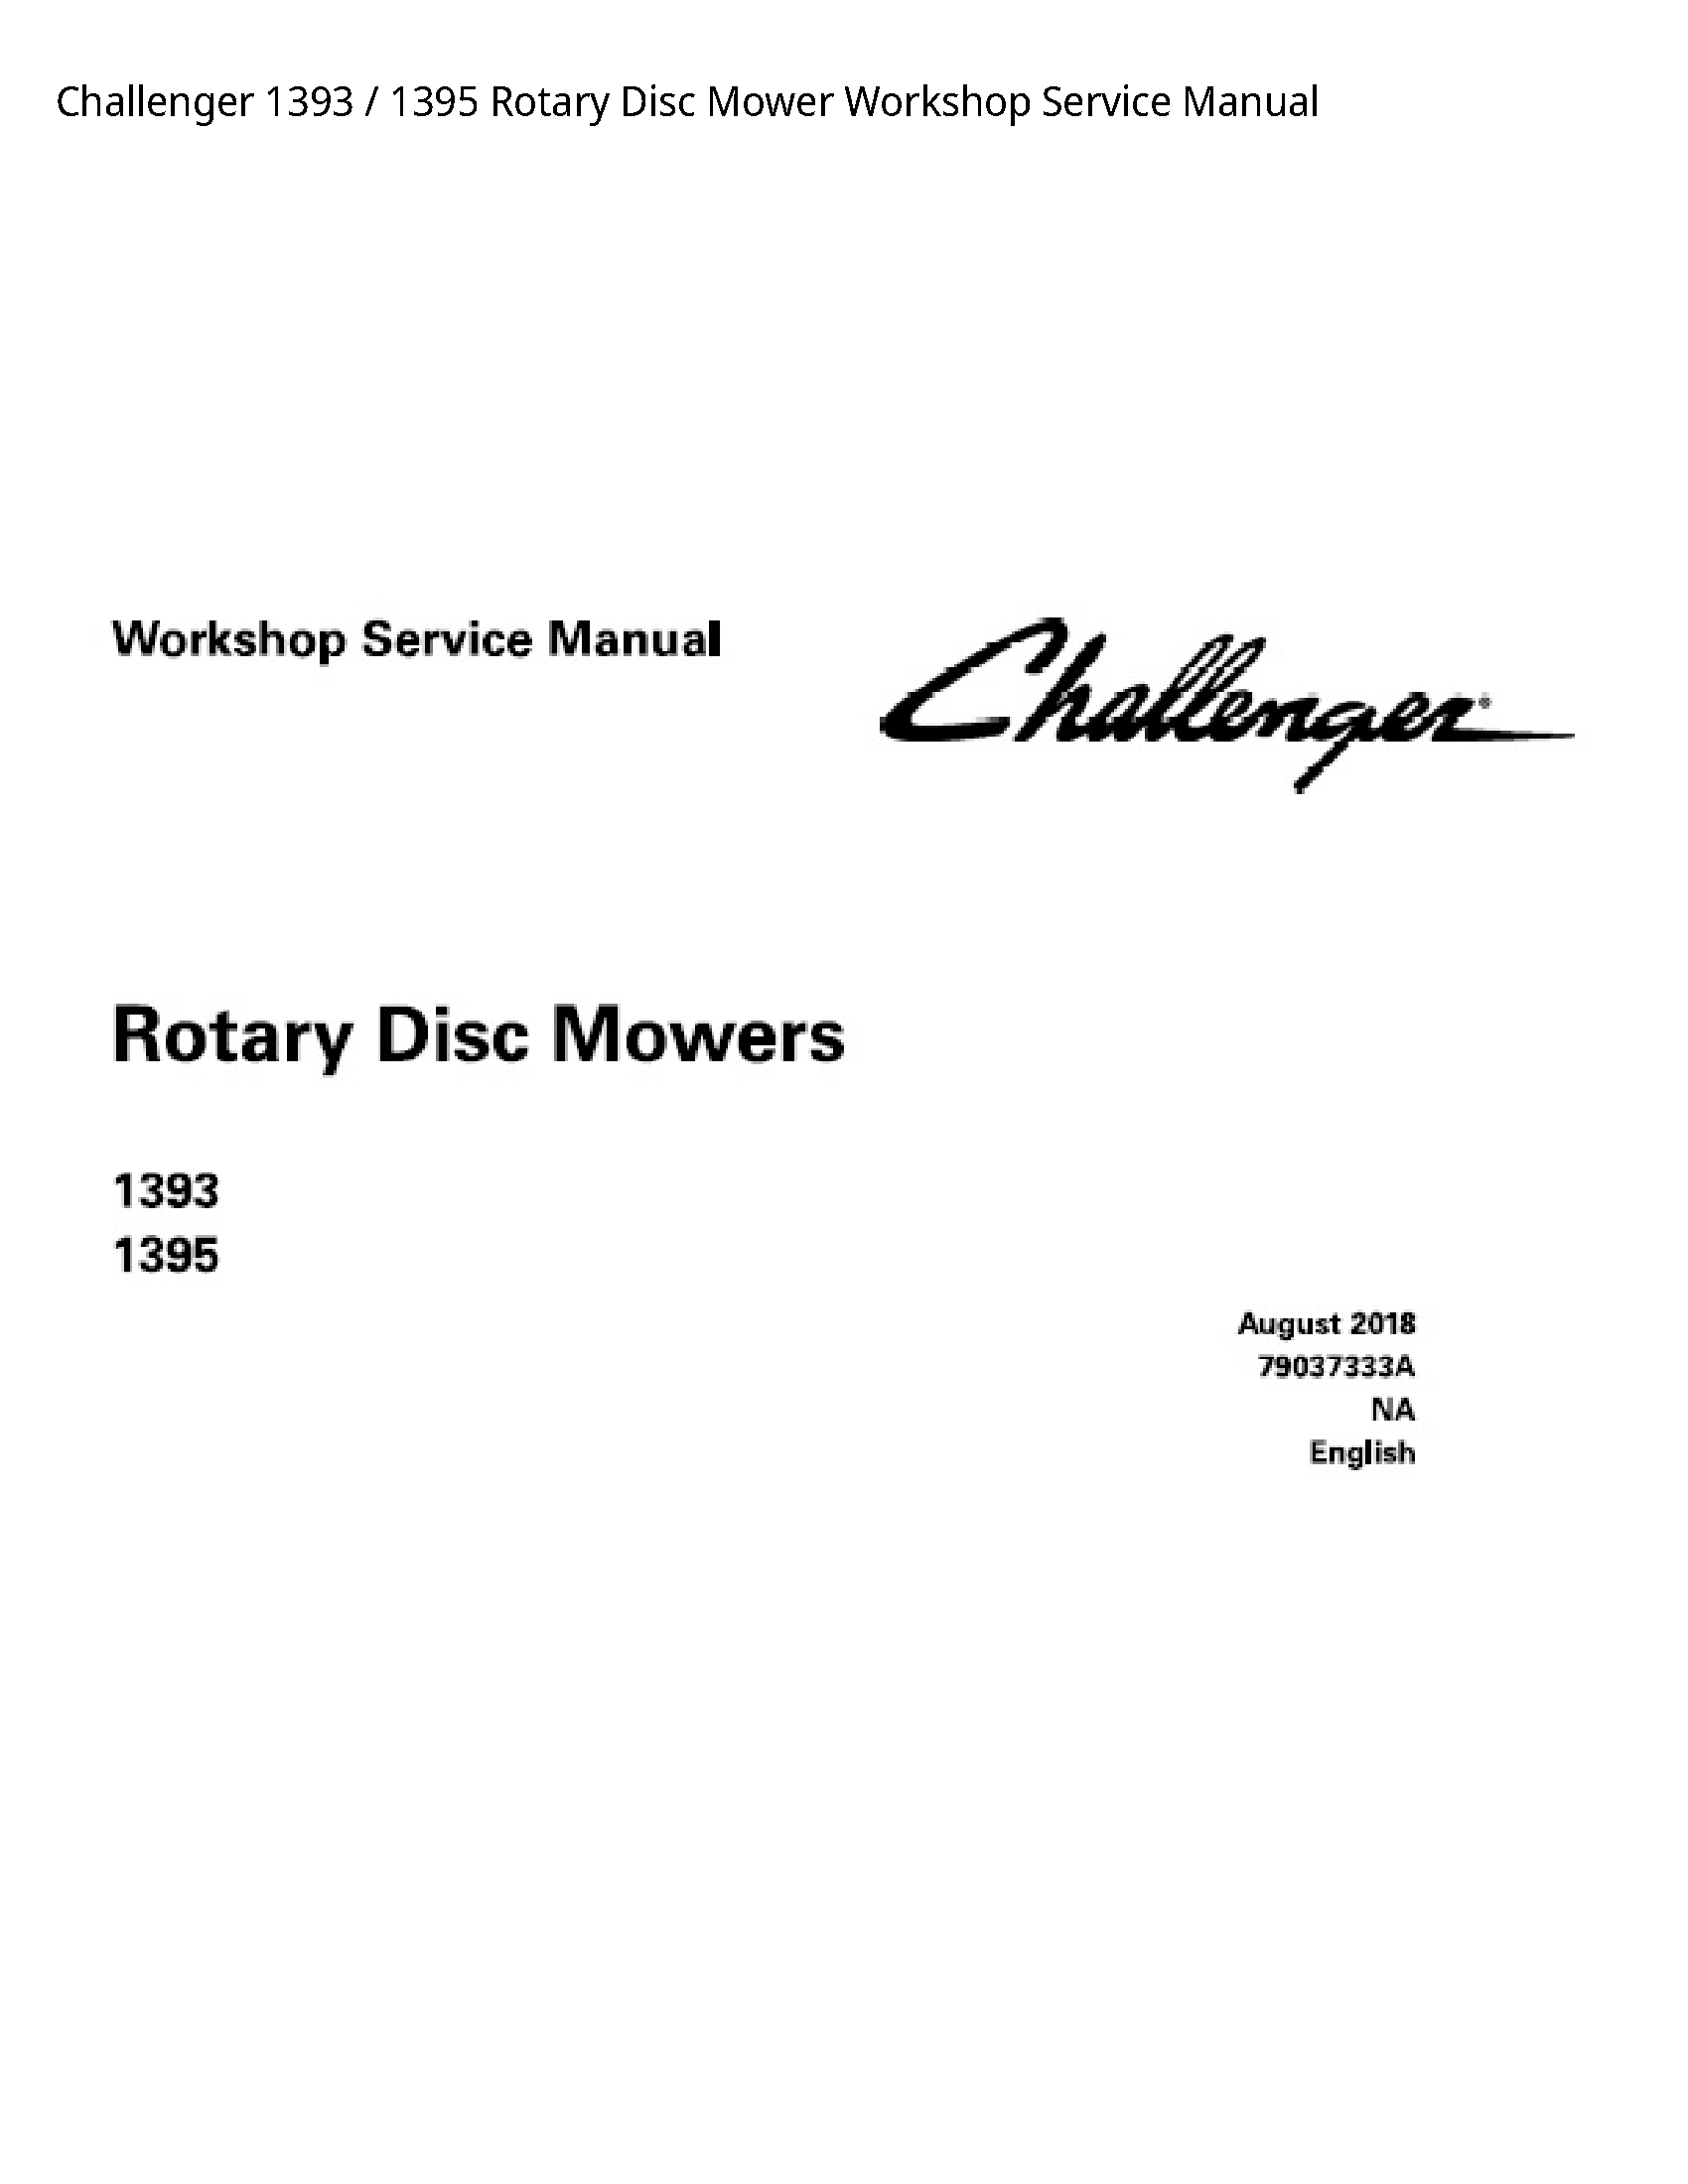 Challenger 1393 Rotary Disc Mower Service manual